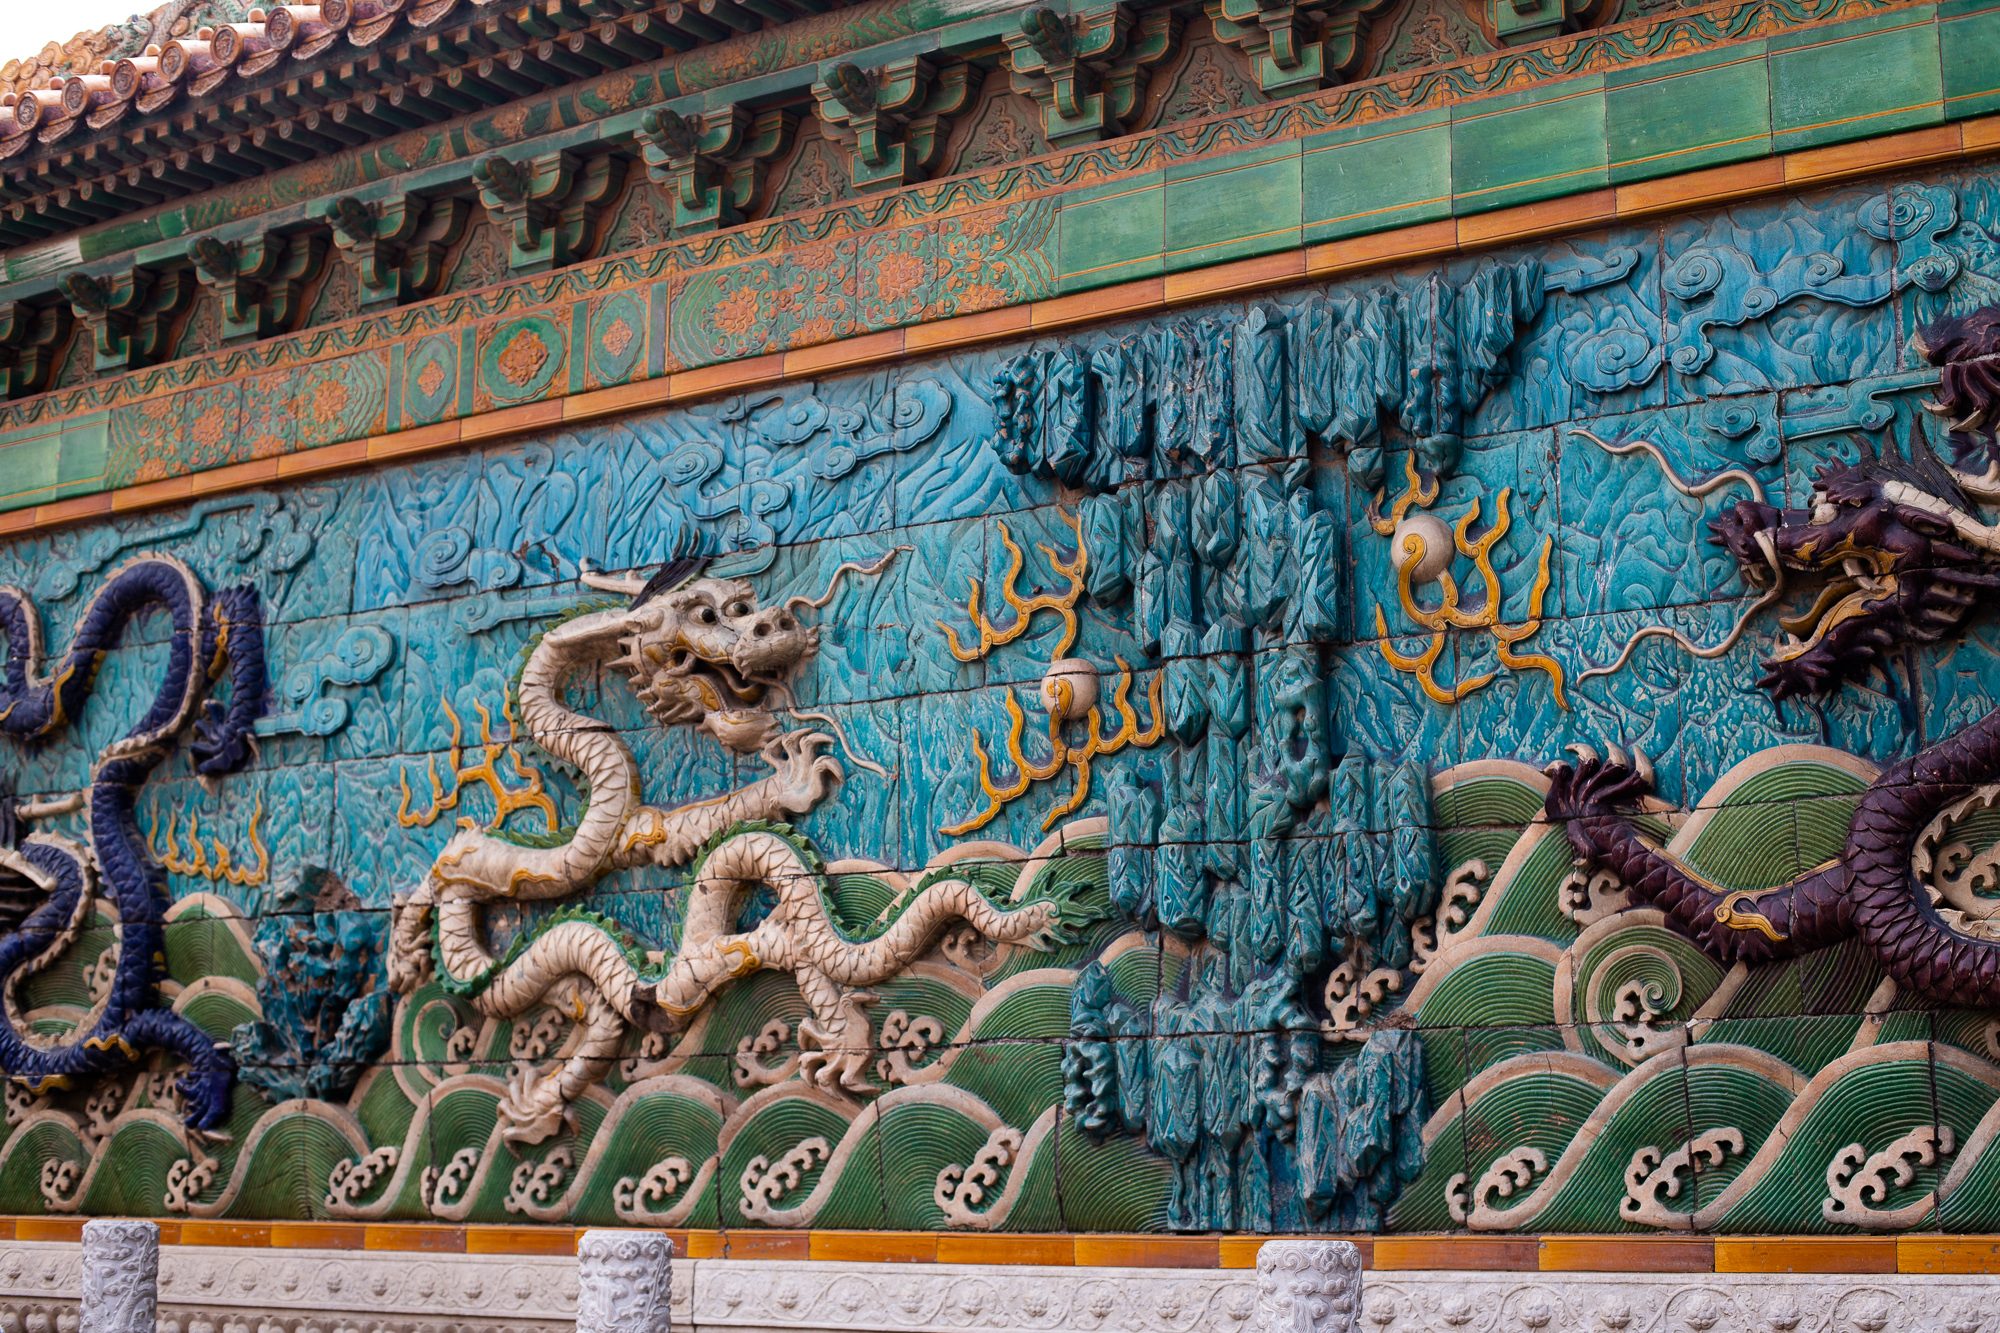 what to do in beijing, the forbidden city, the palace museum, history of beijing, history of china, world palaces, world's largest palace, room of clocks, jewelry museum, museums in china